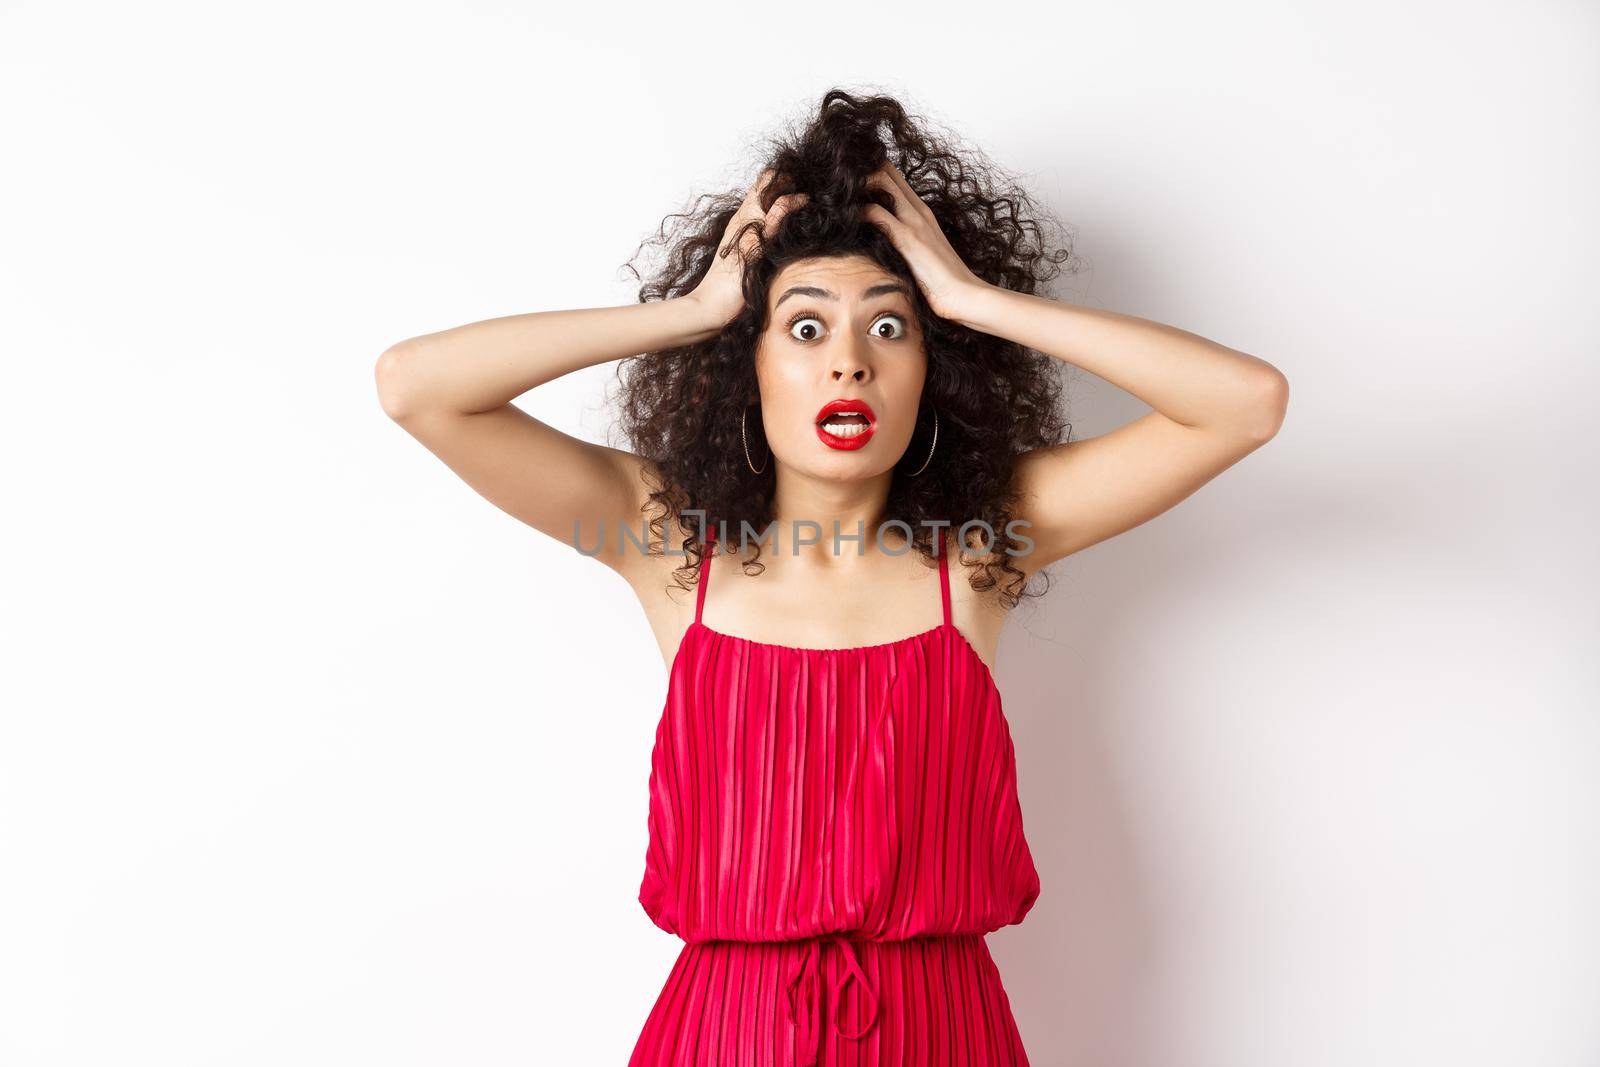 Shocked young woman holding hands on head and panicking, staring frustrated at camera, wearing red dress and makeup, white background.